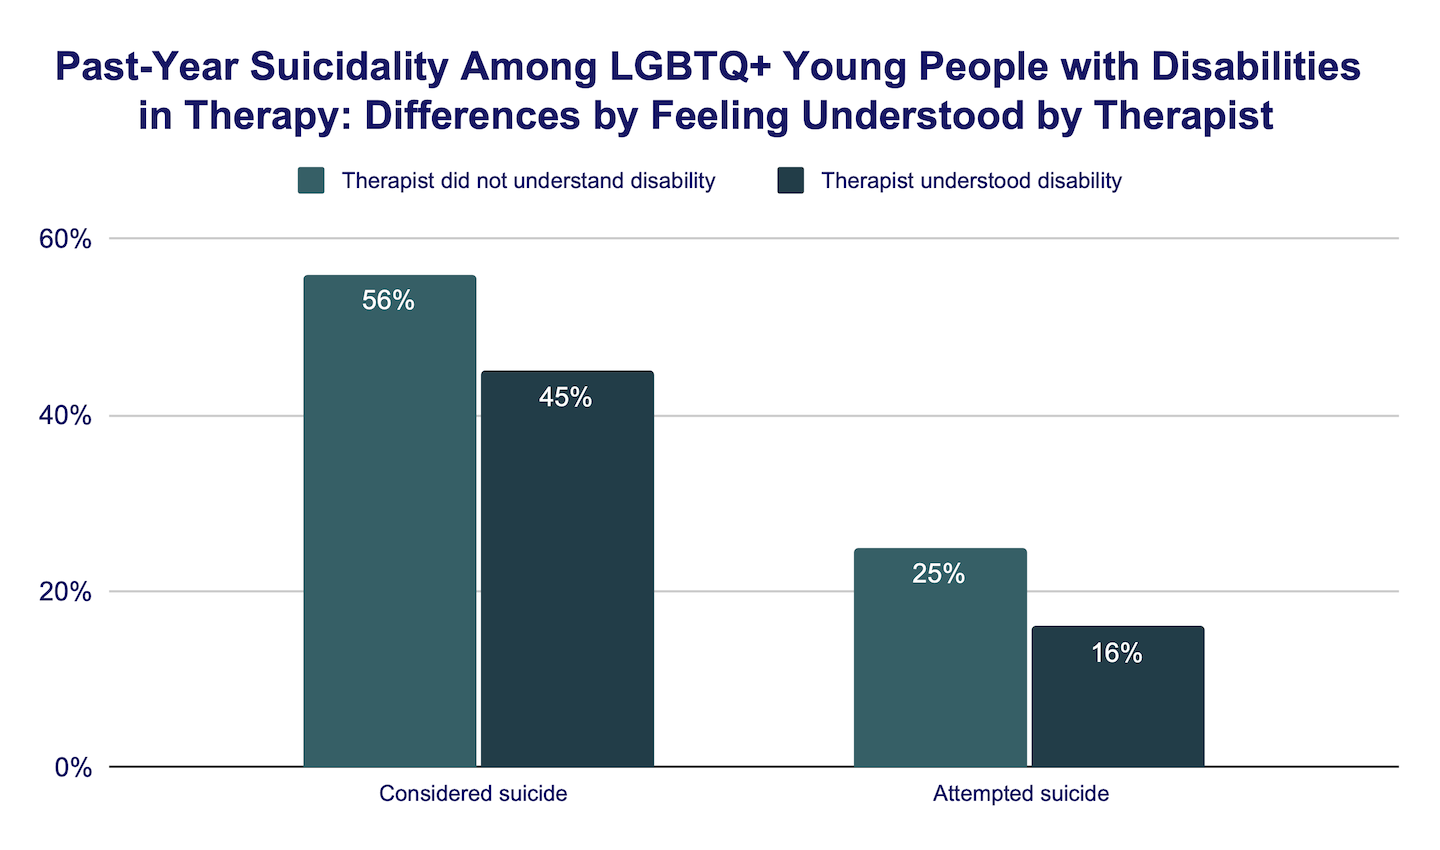 Past-Year Suicidality Among LGBTQ+ Young People with Disabilities in Therapy: Differences by Feeling Understood by Therapist